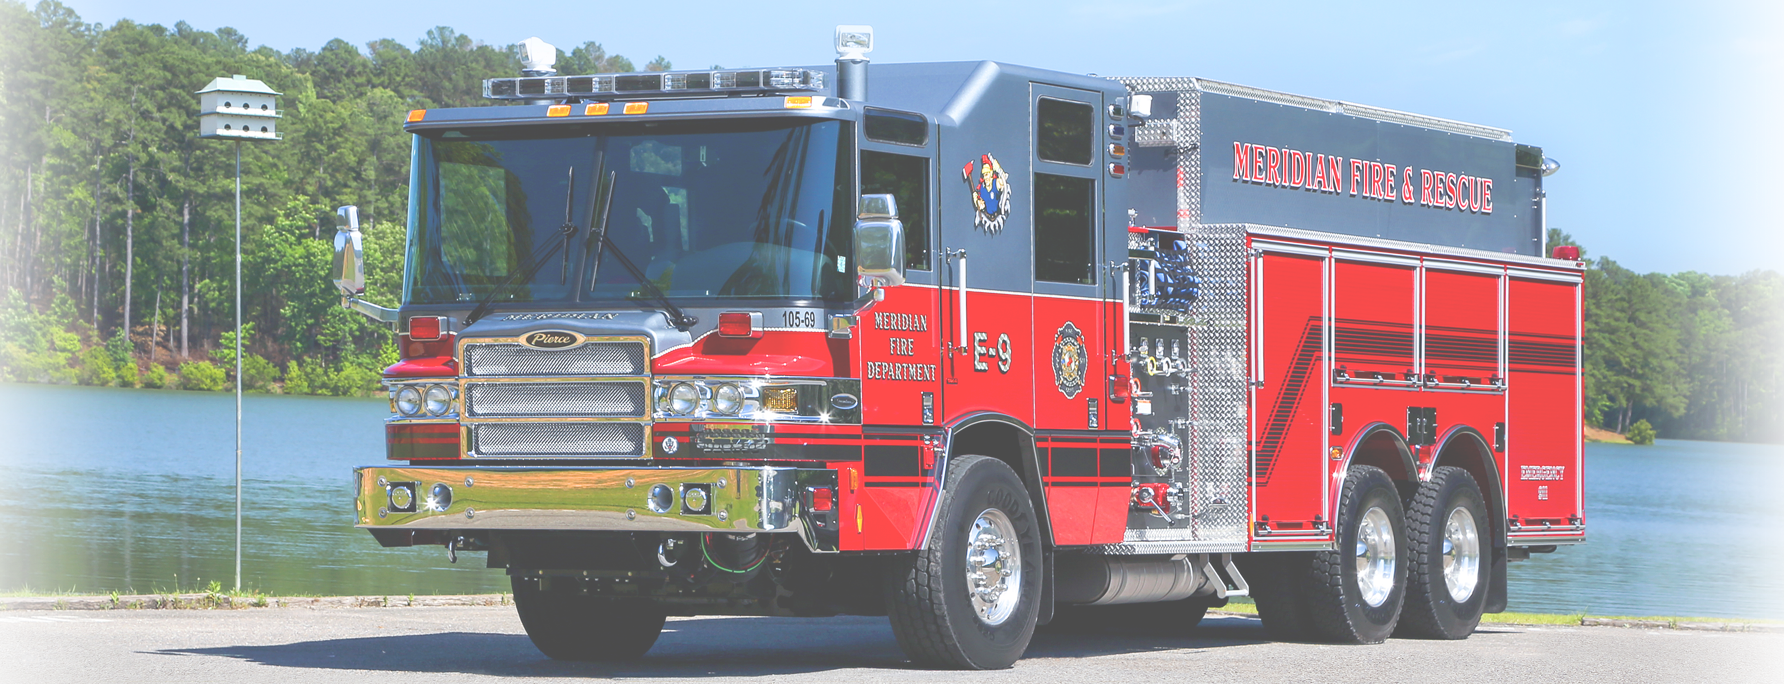 meridian fire and rescue fire truck tanker